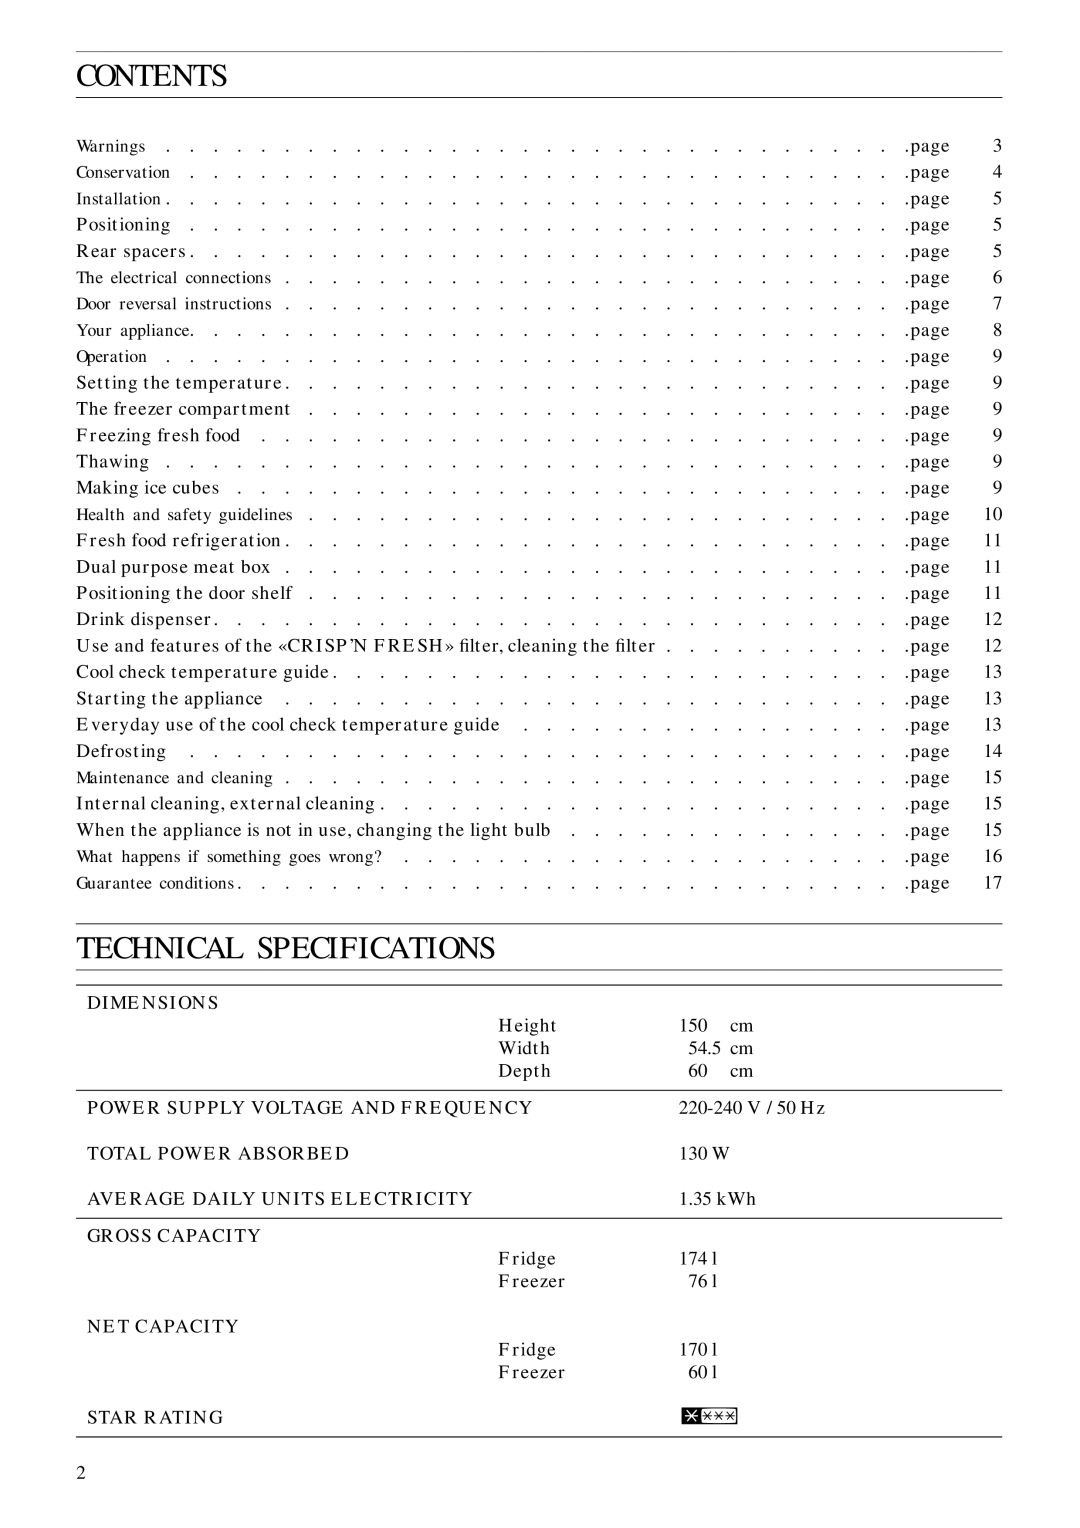 Zanussi ZFC 61/27 manual Contents, Technical Specifications 